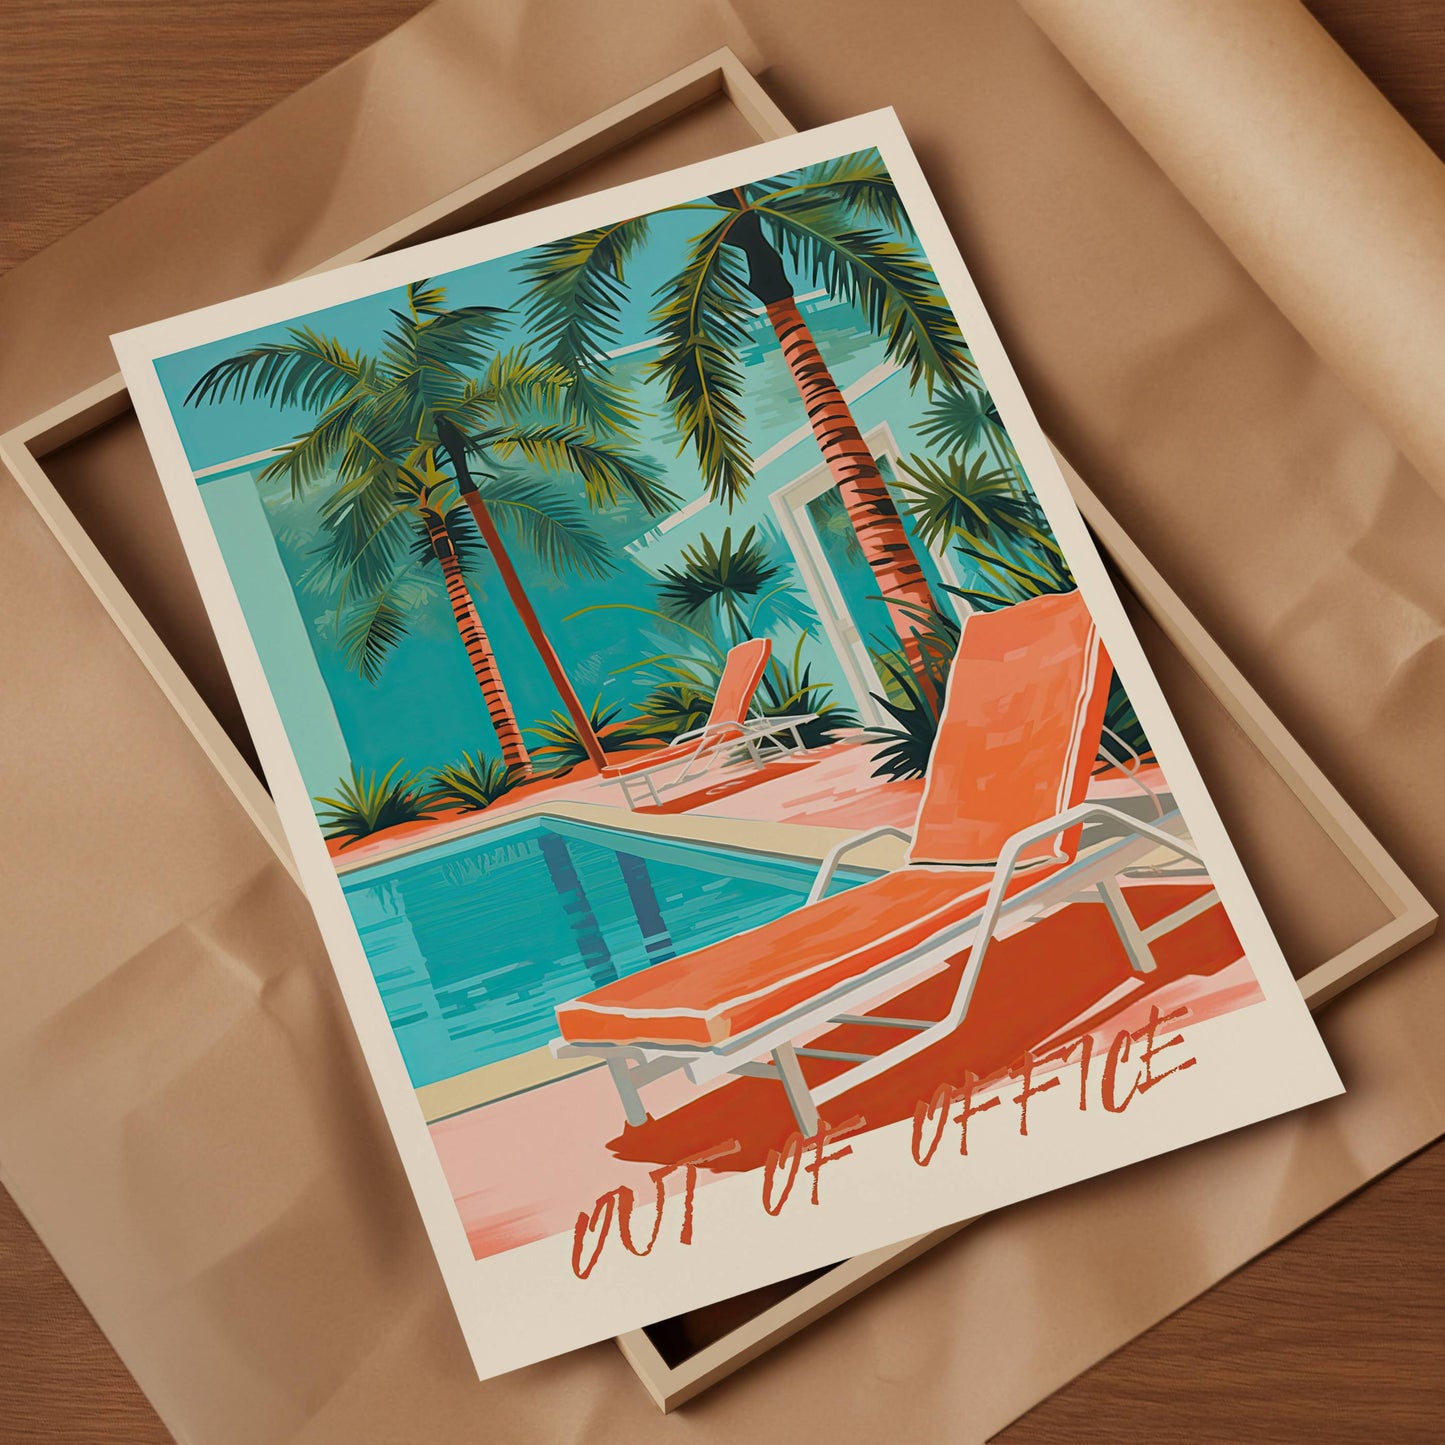 Out of Office Art Print